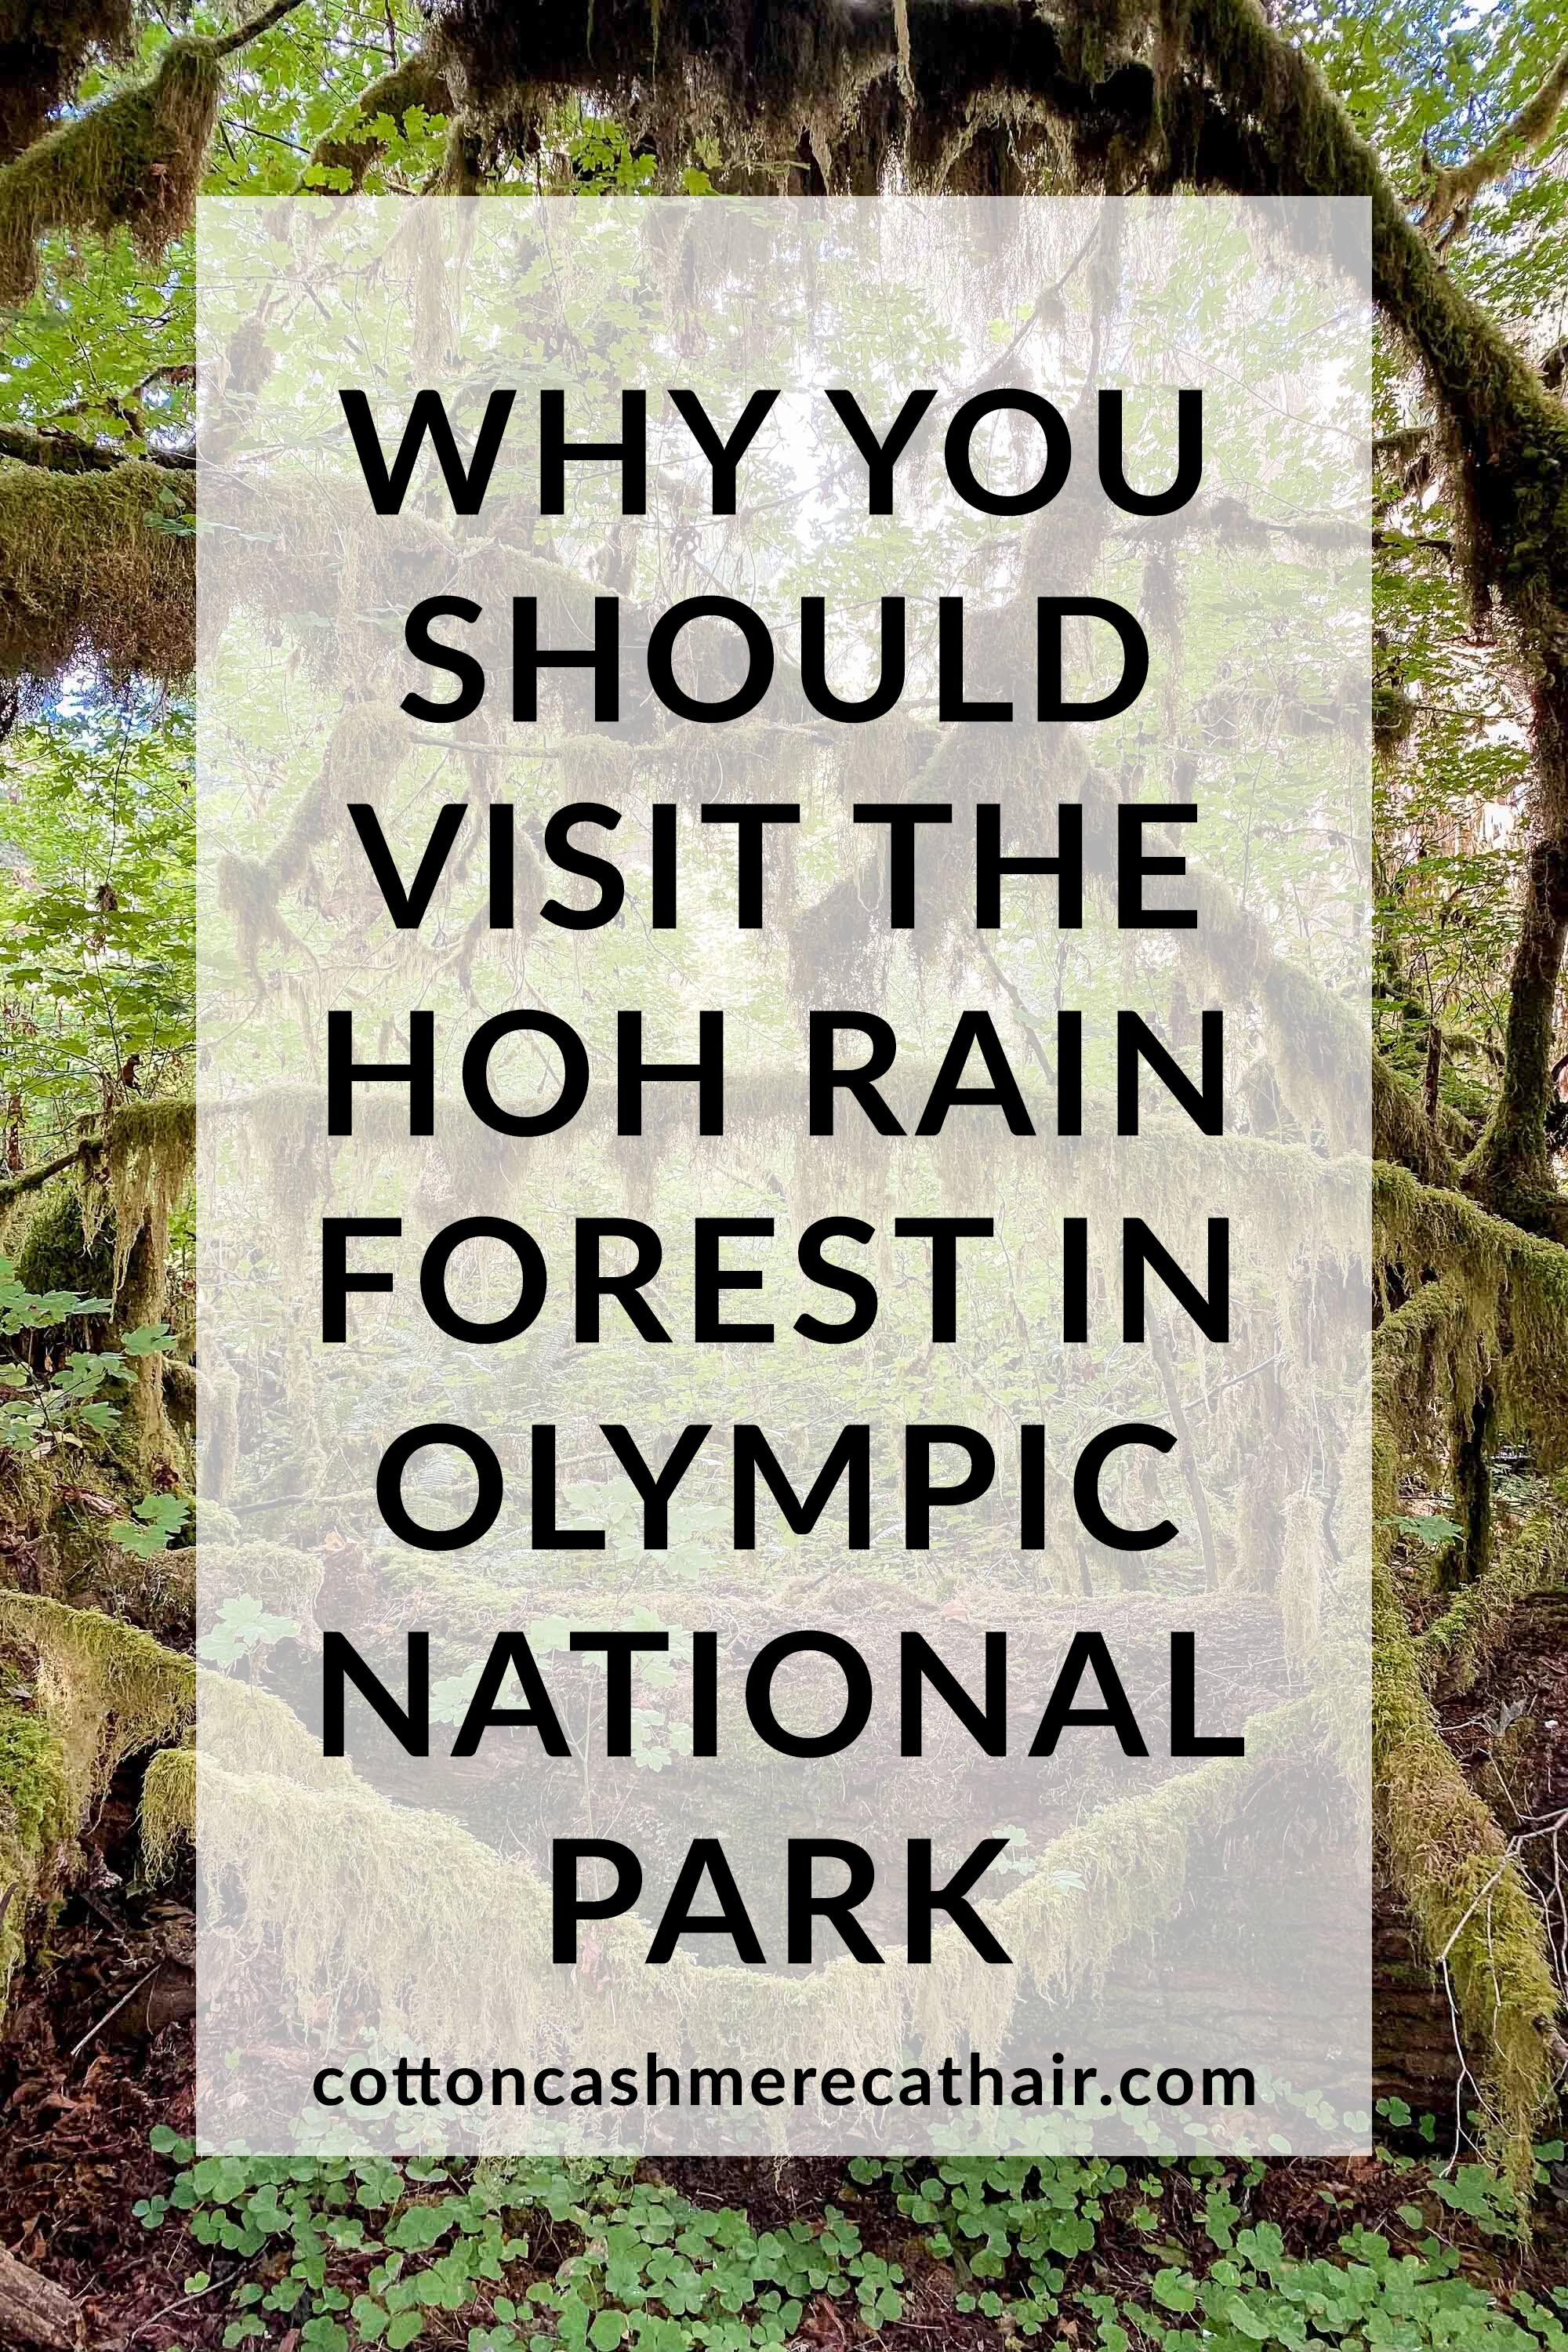 Why you should visit the Hoh Rain Forest